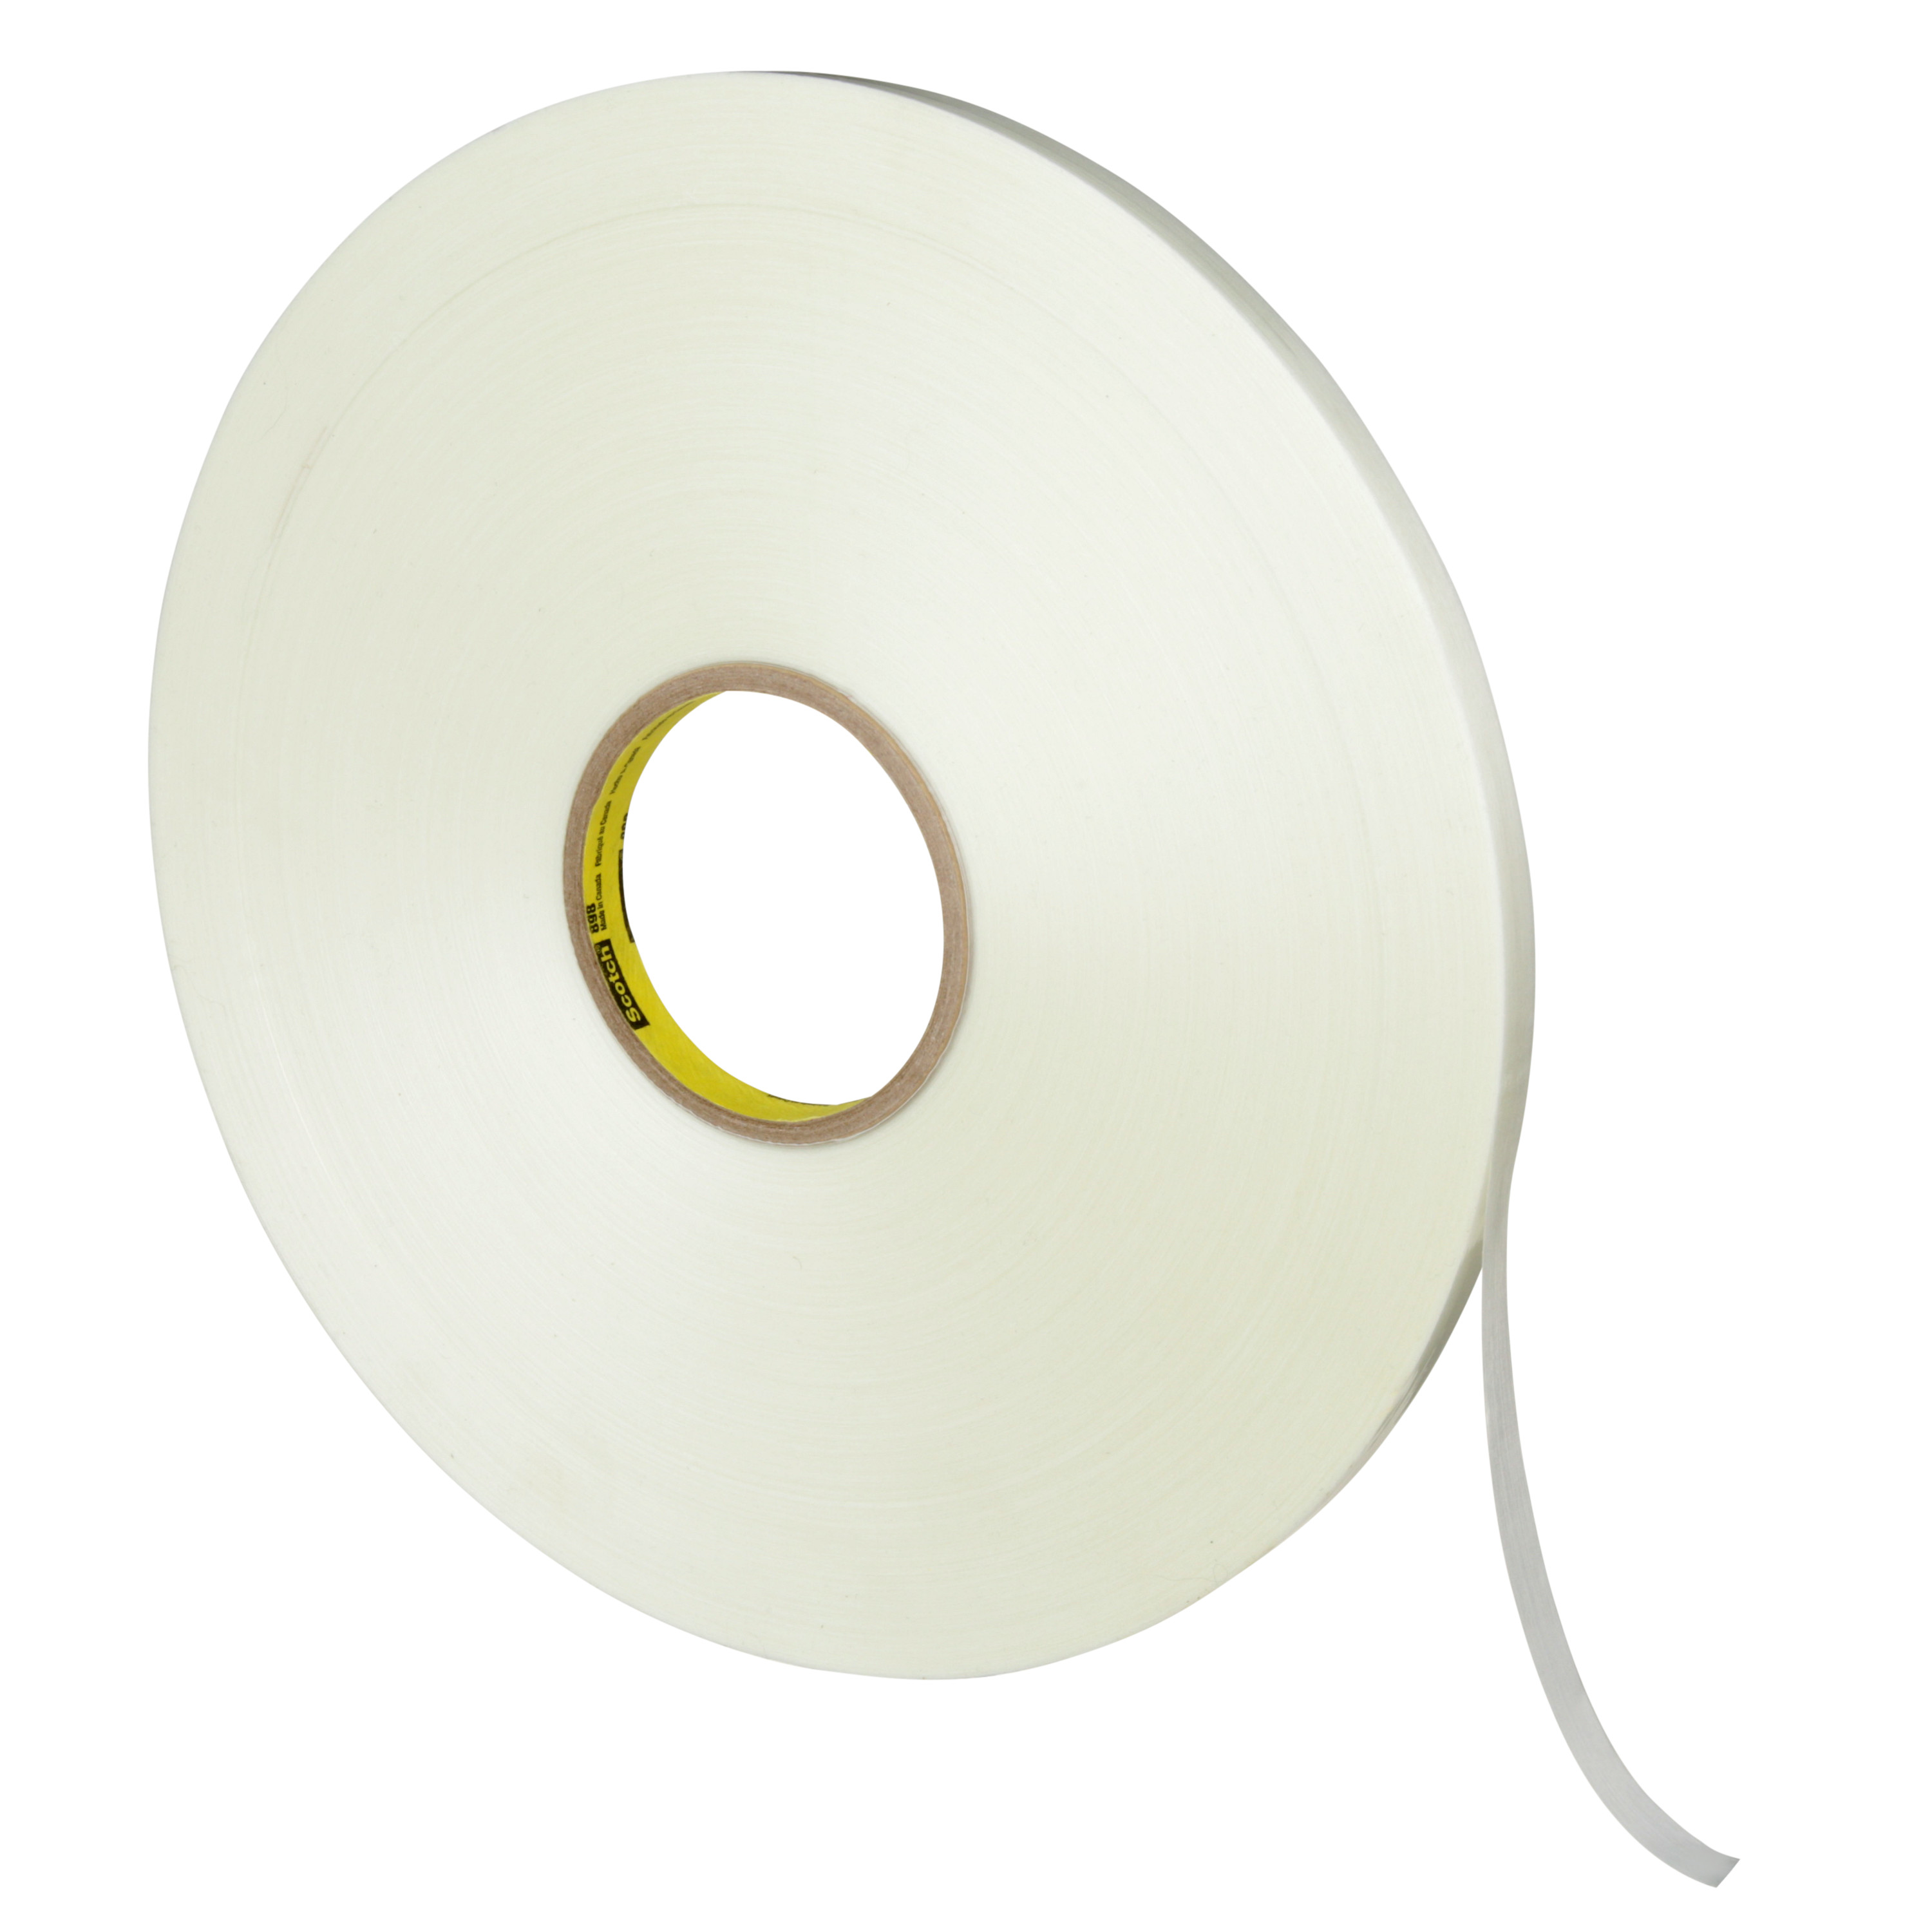 Product Number 898 | Scotch® Filament Tape 898